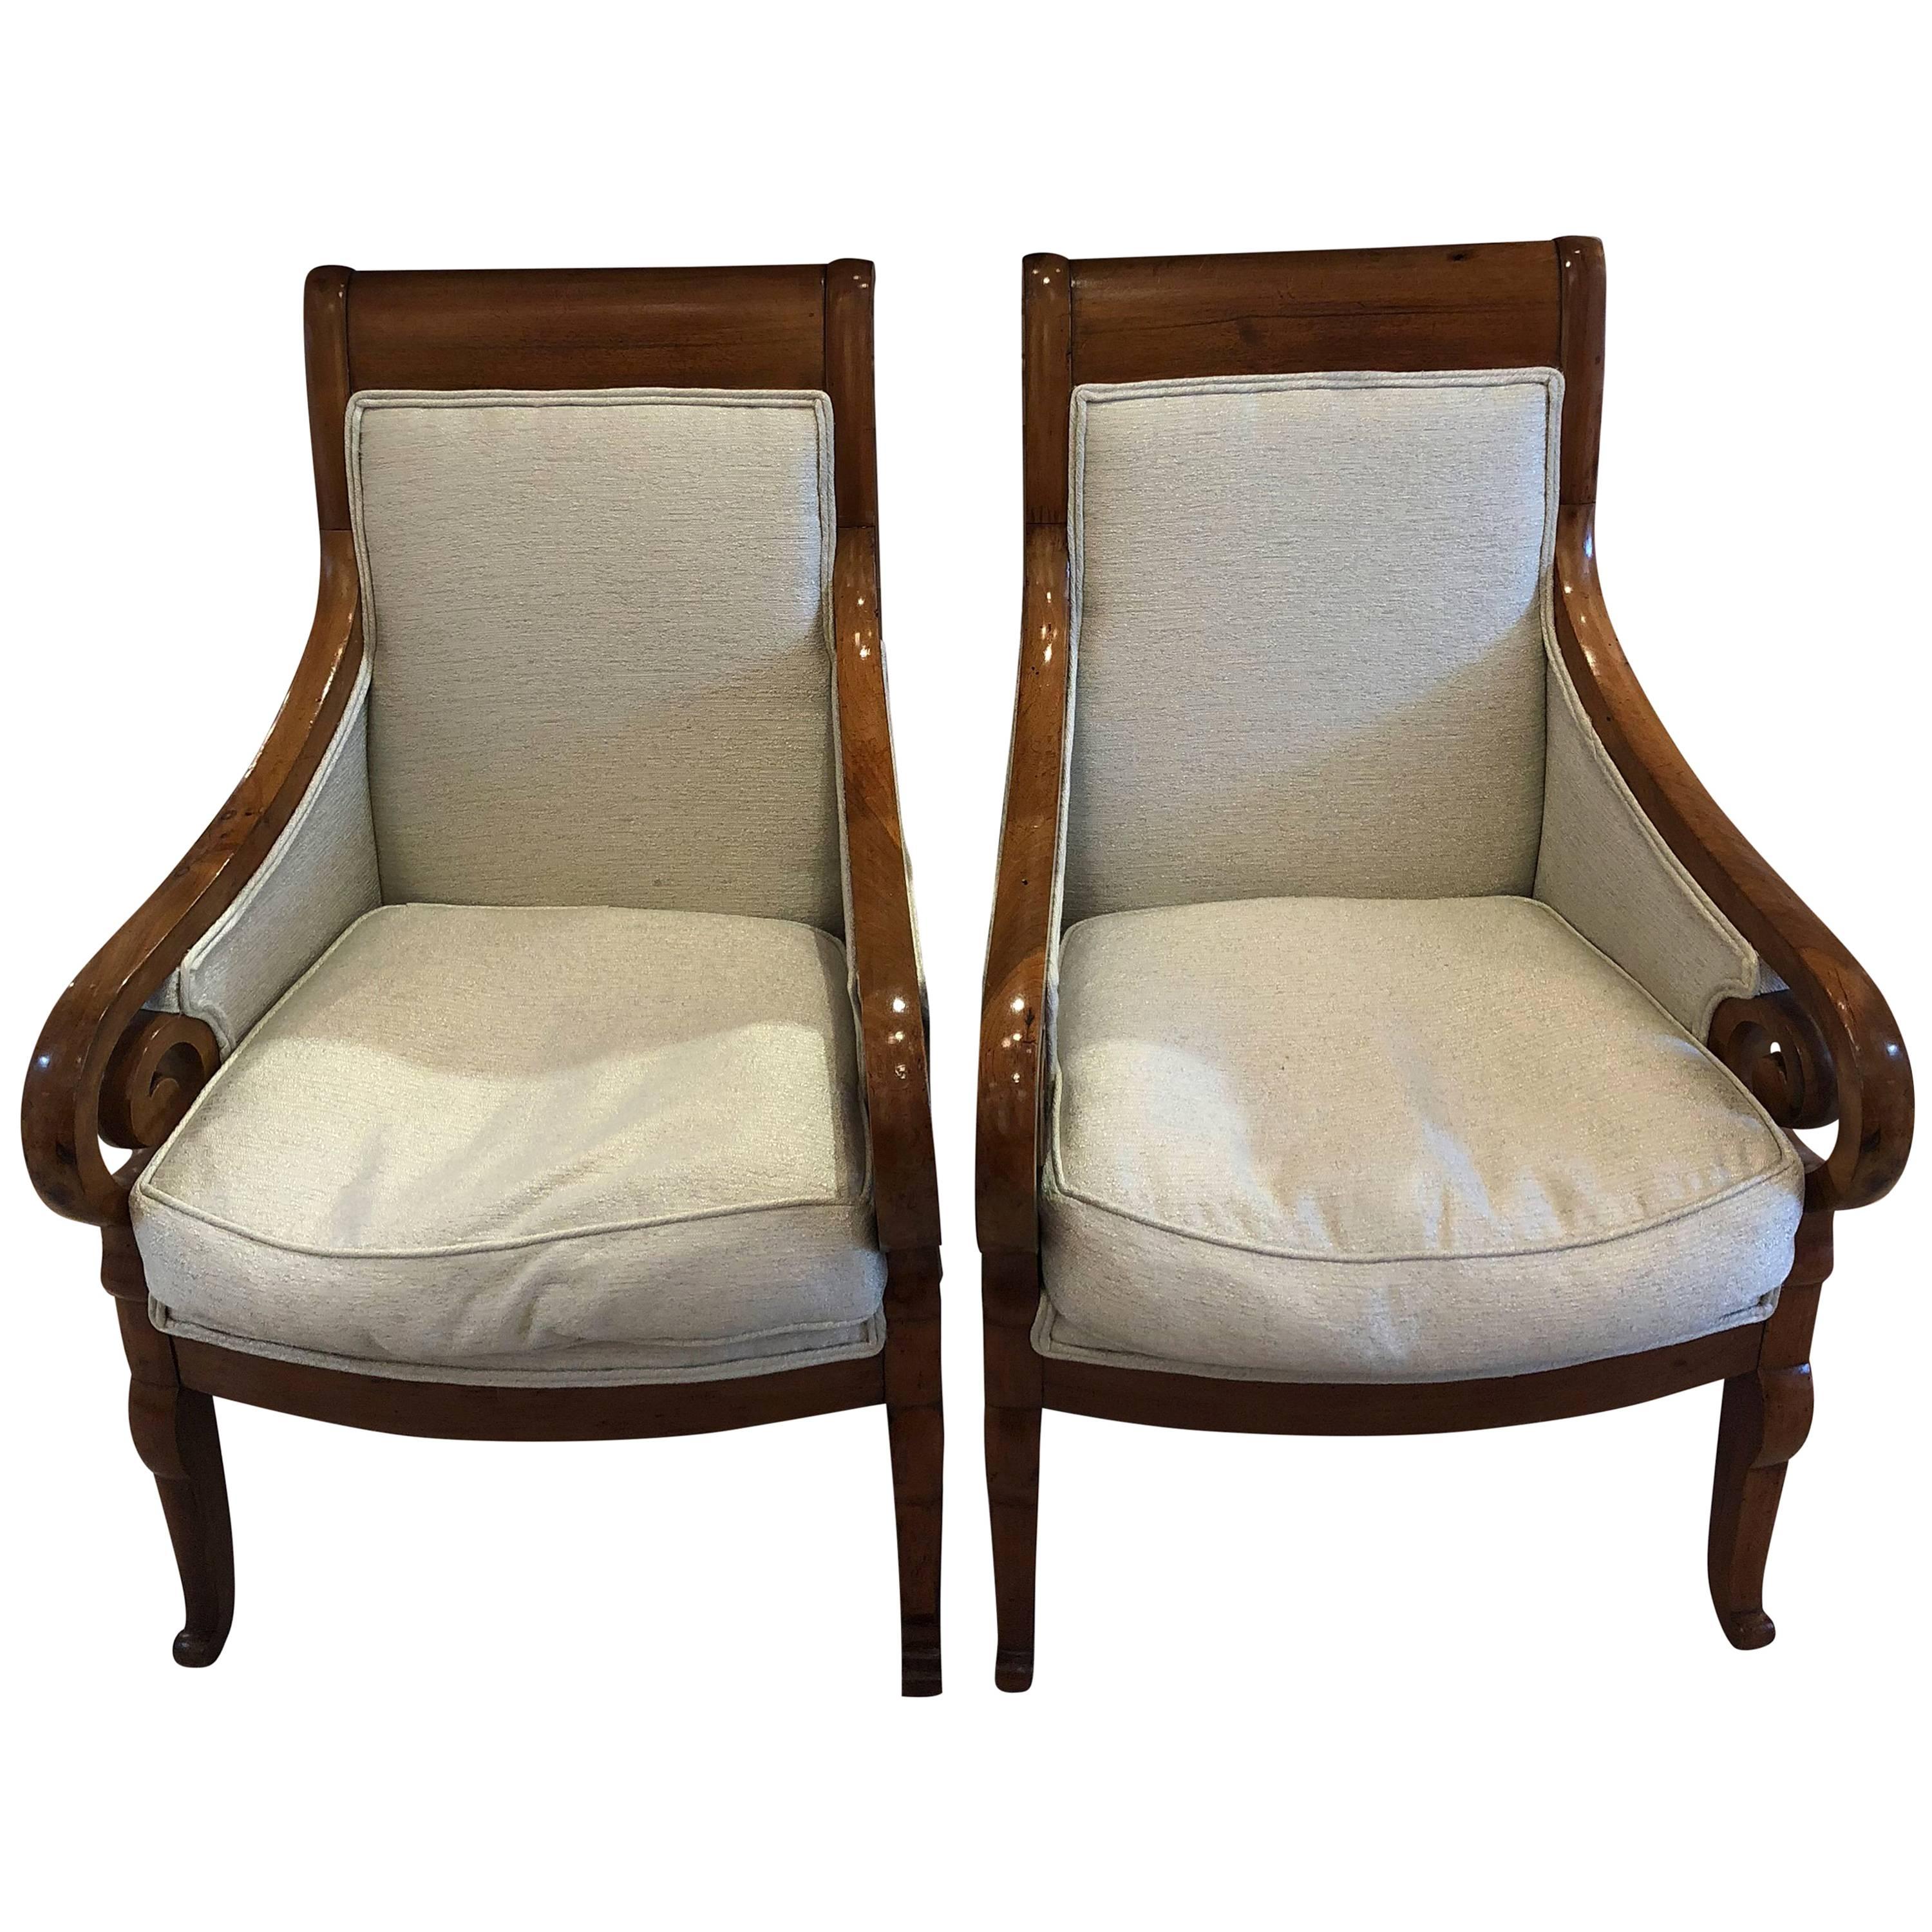 Pair of Walnut Armchairs Upholstered in Angelie C. Seafoam For Sale